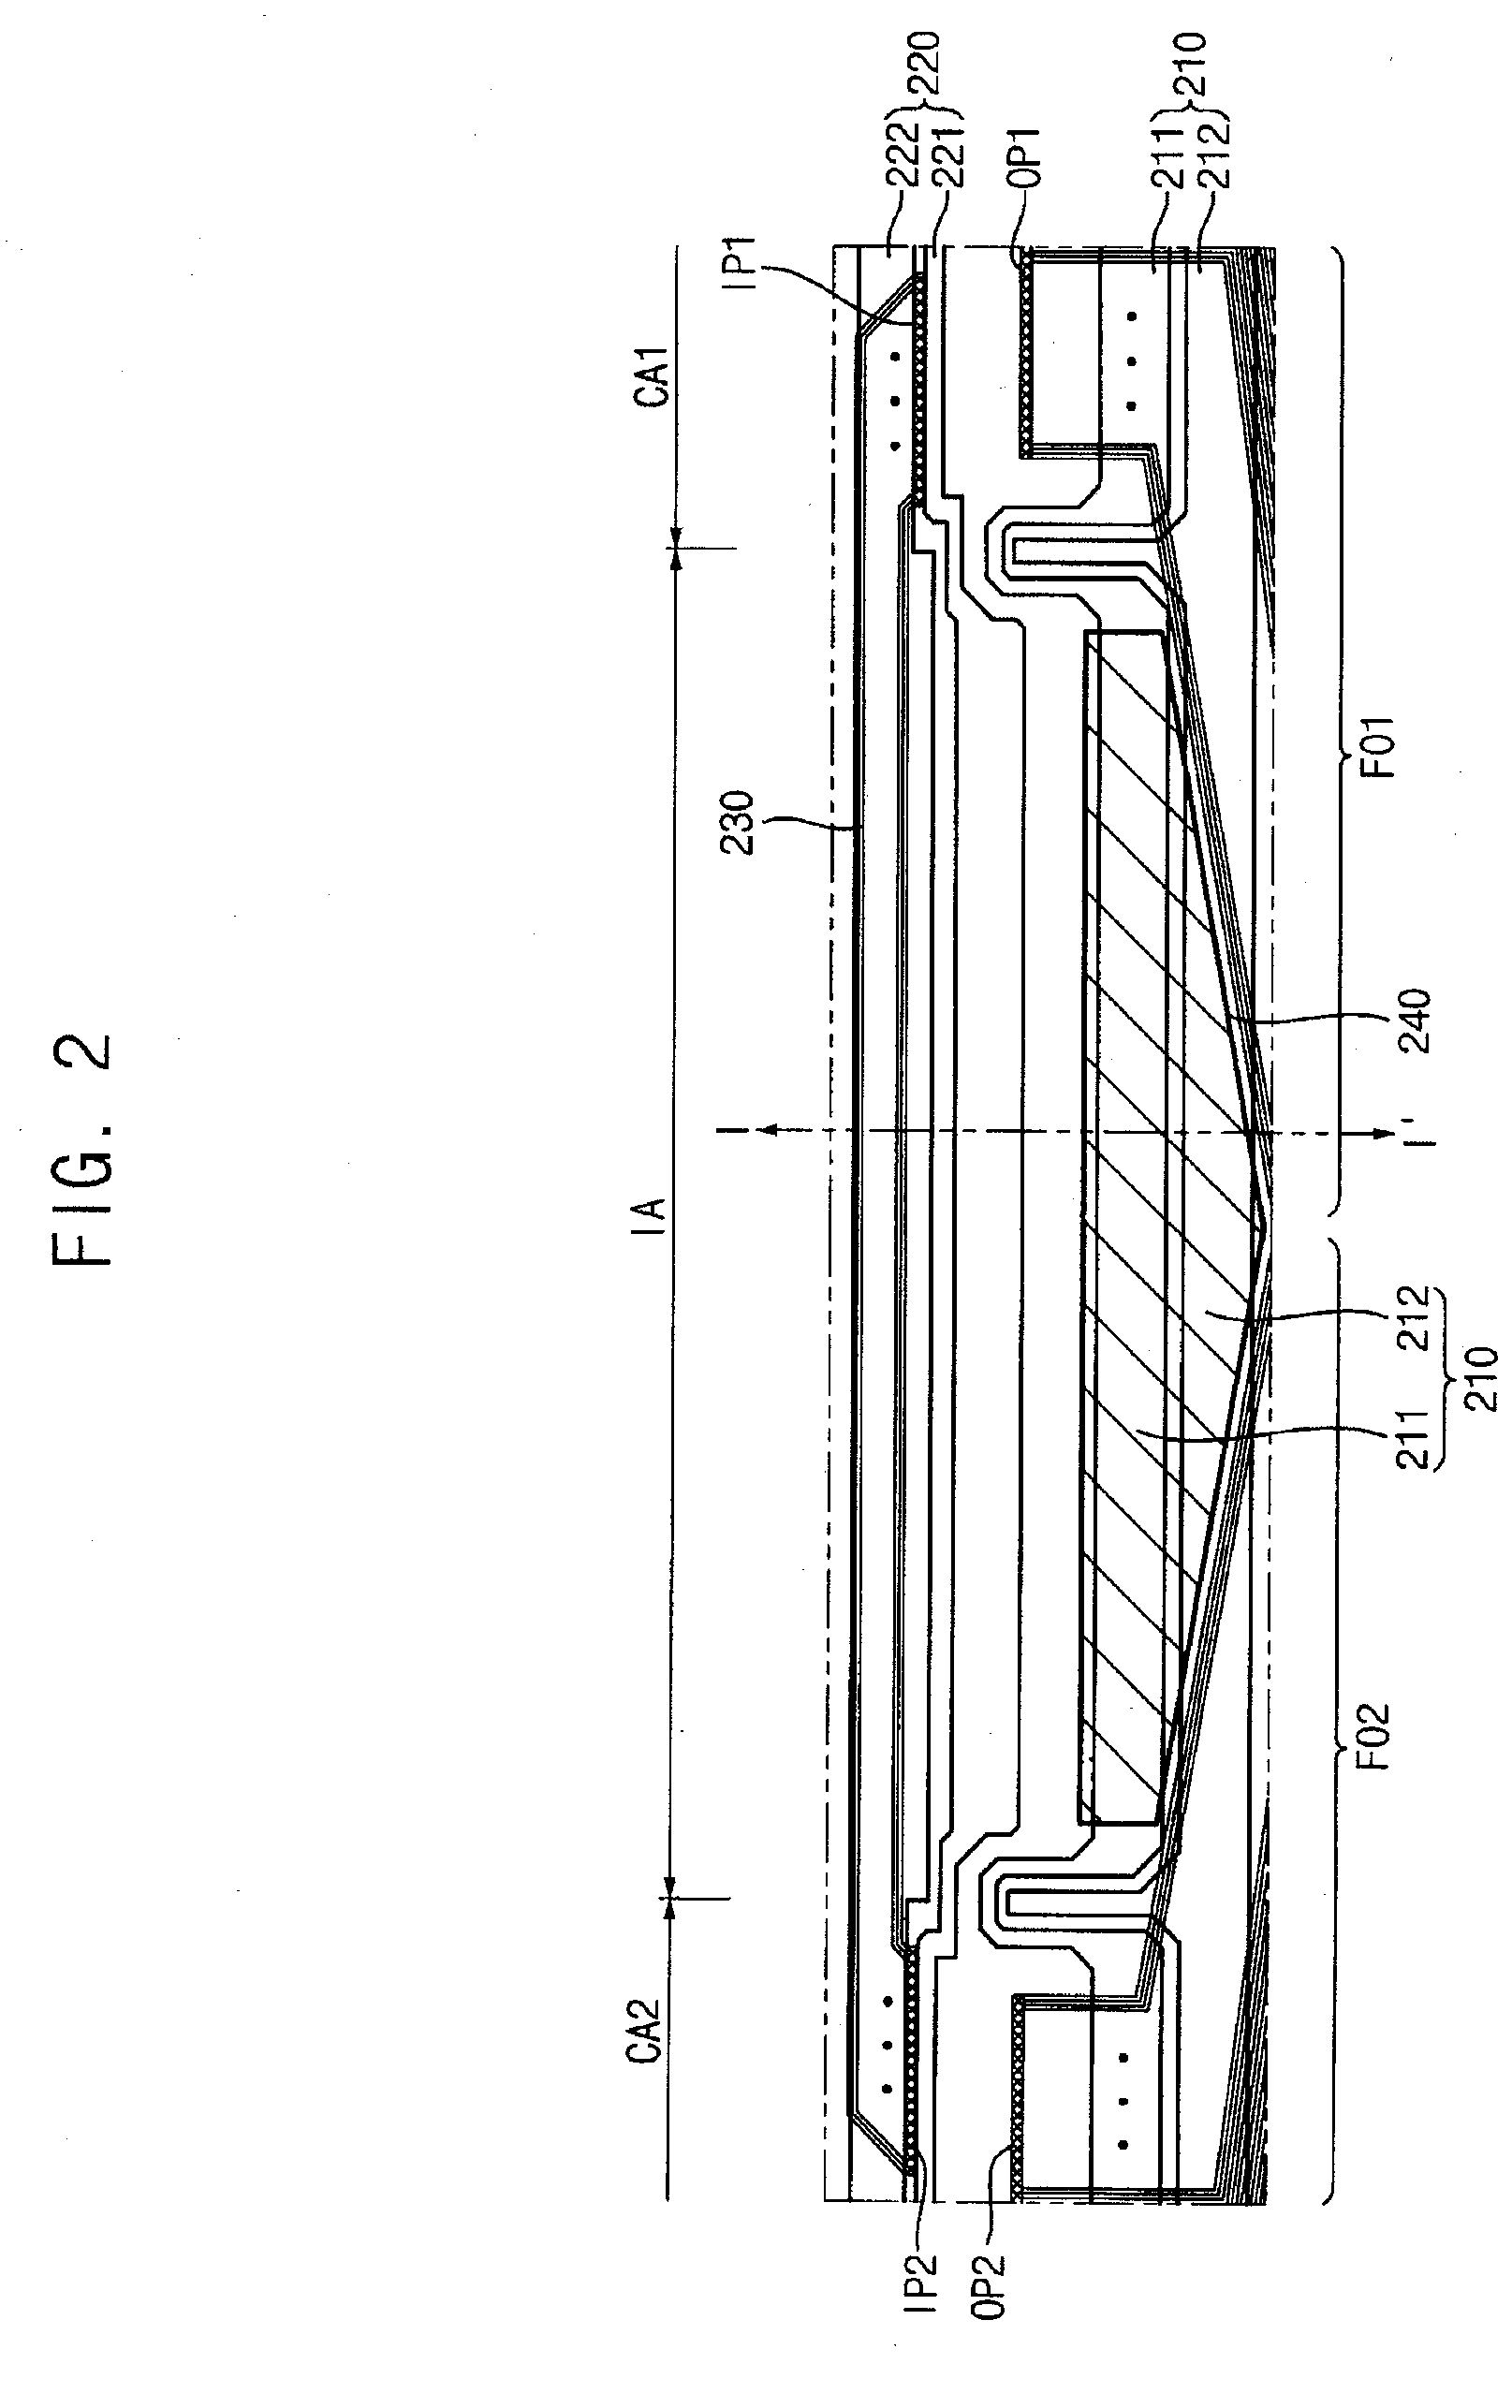 Display substrate having integrated bypass capacitors, display device having the same and method of manufacturing the same